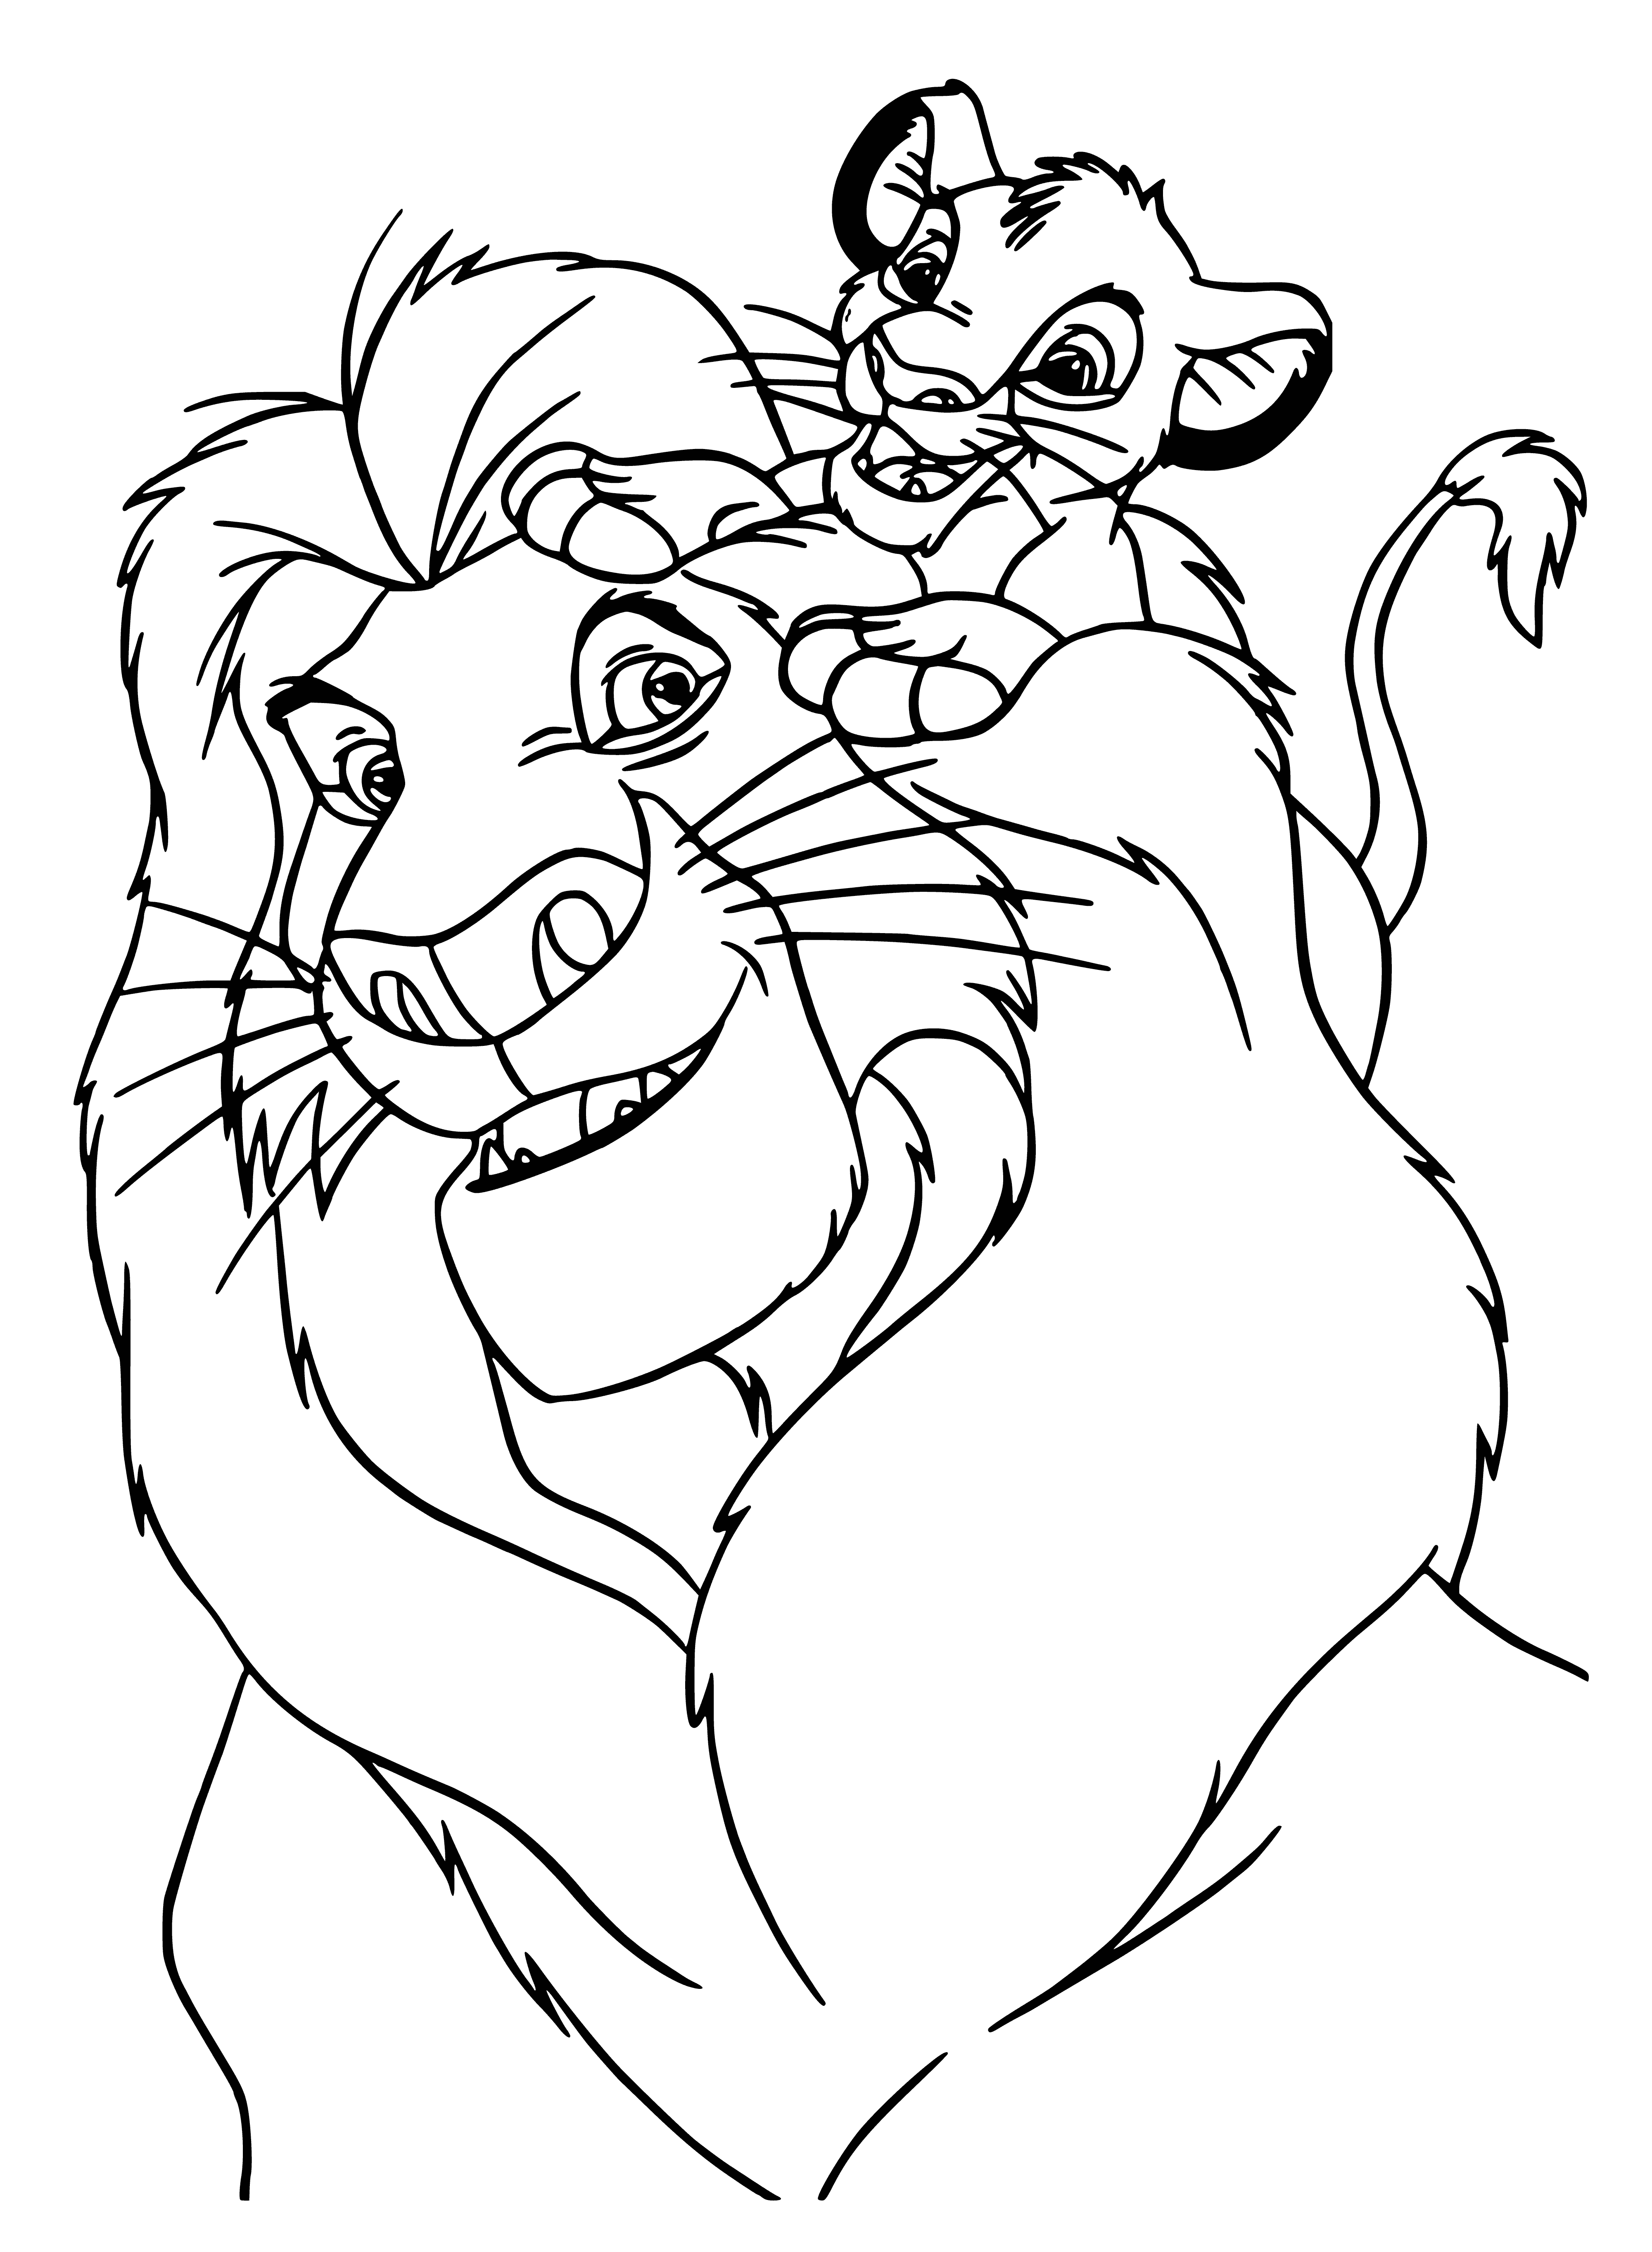 coloring page: King Mufasa rules the Pride Lands with kindness, His son Simba is a playful, energetic cub with a tuft of black hair. #DisneyAnimals #LionKing